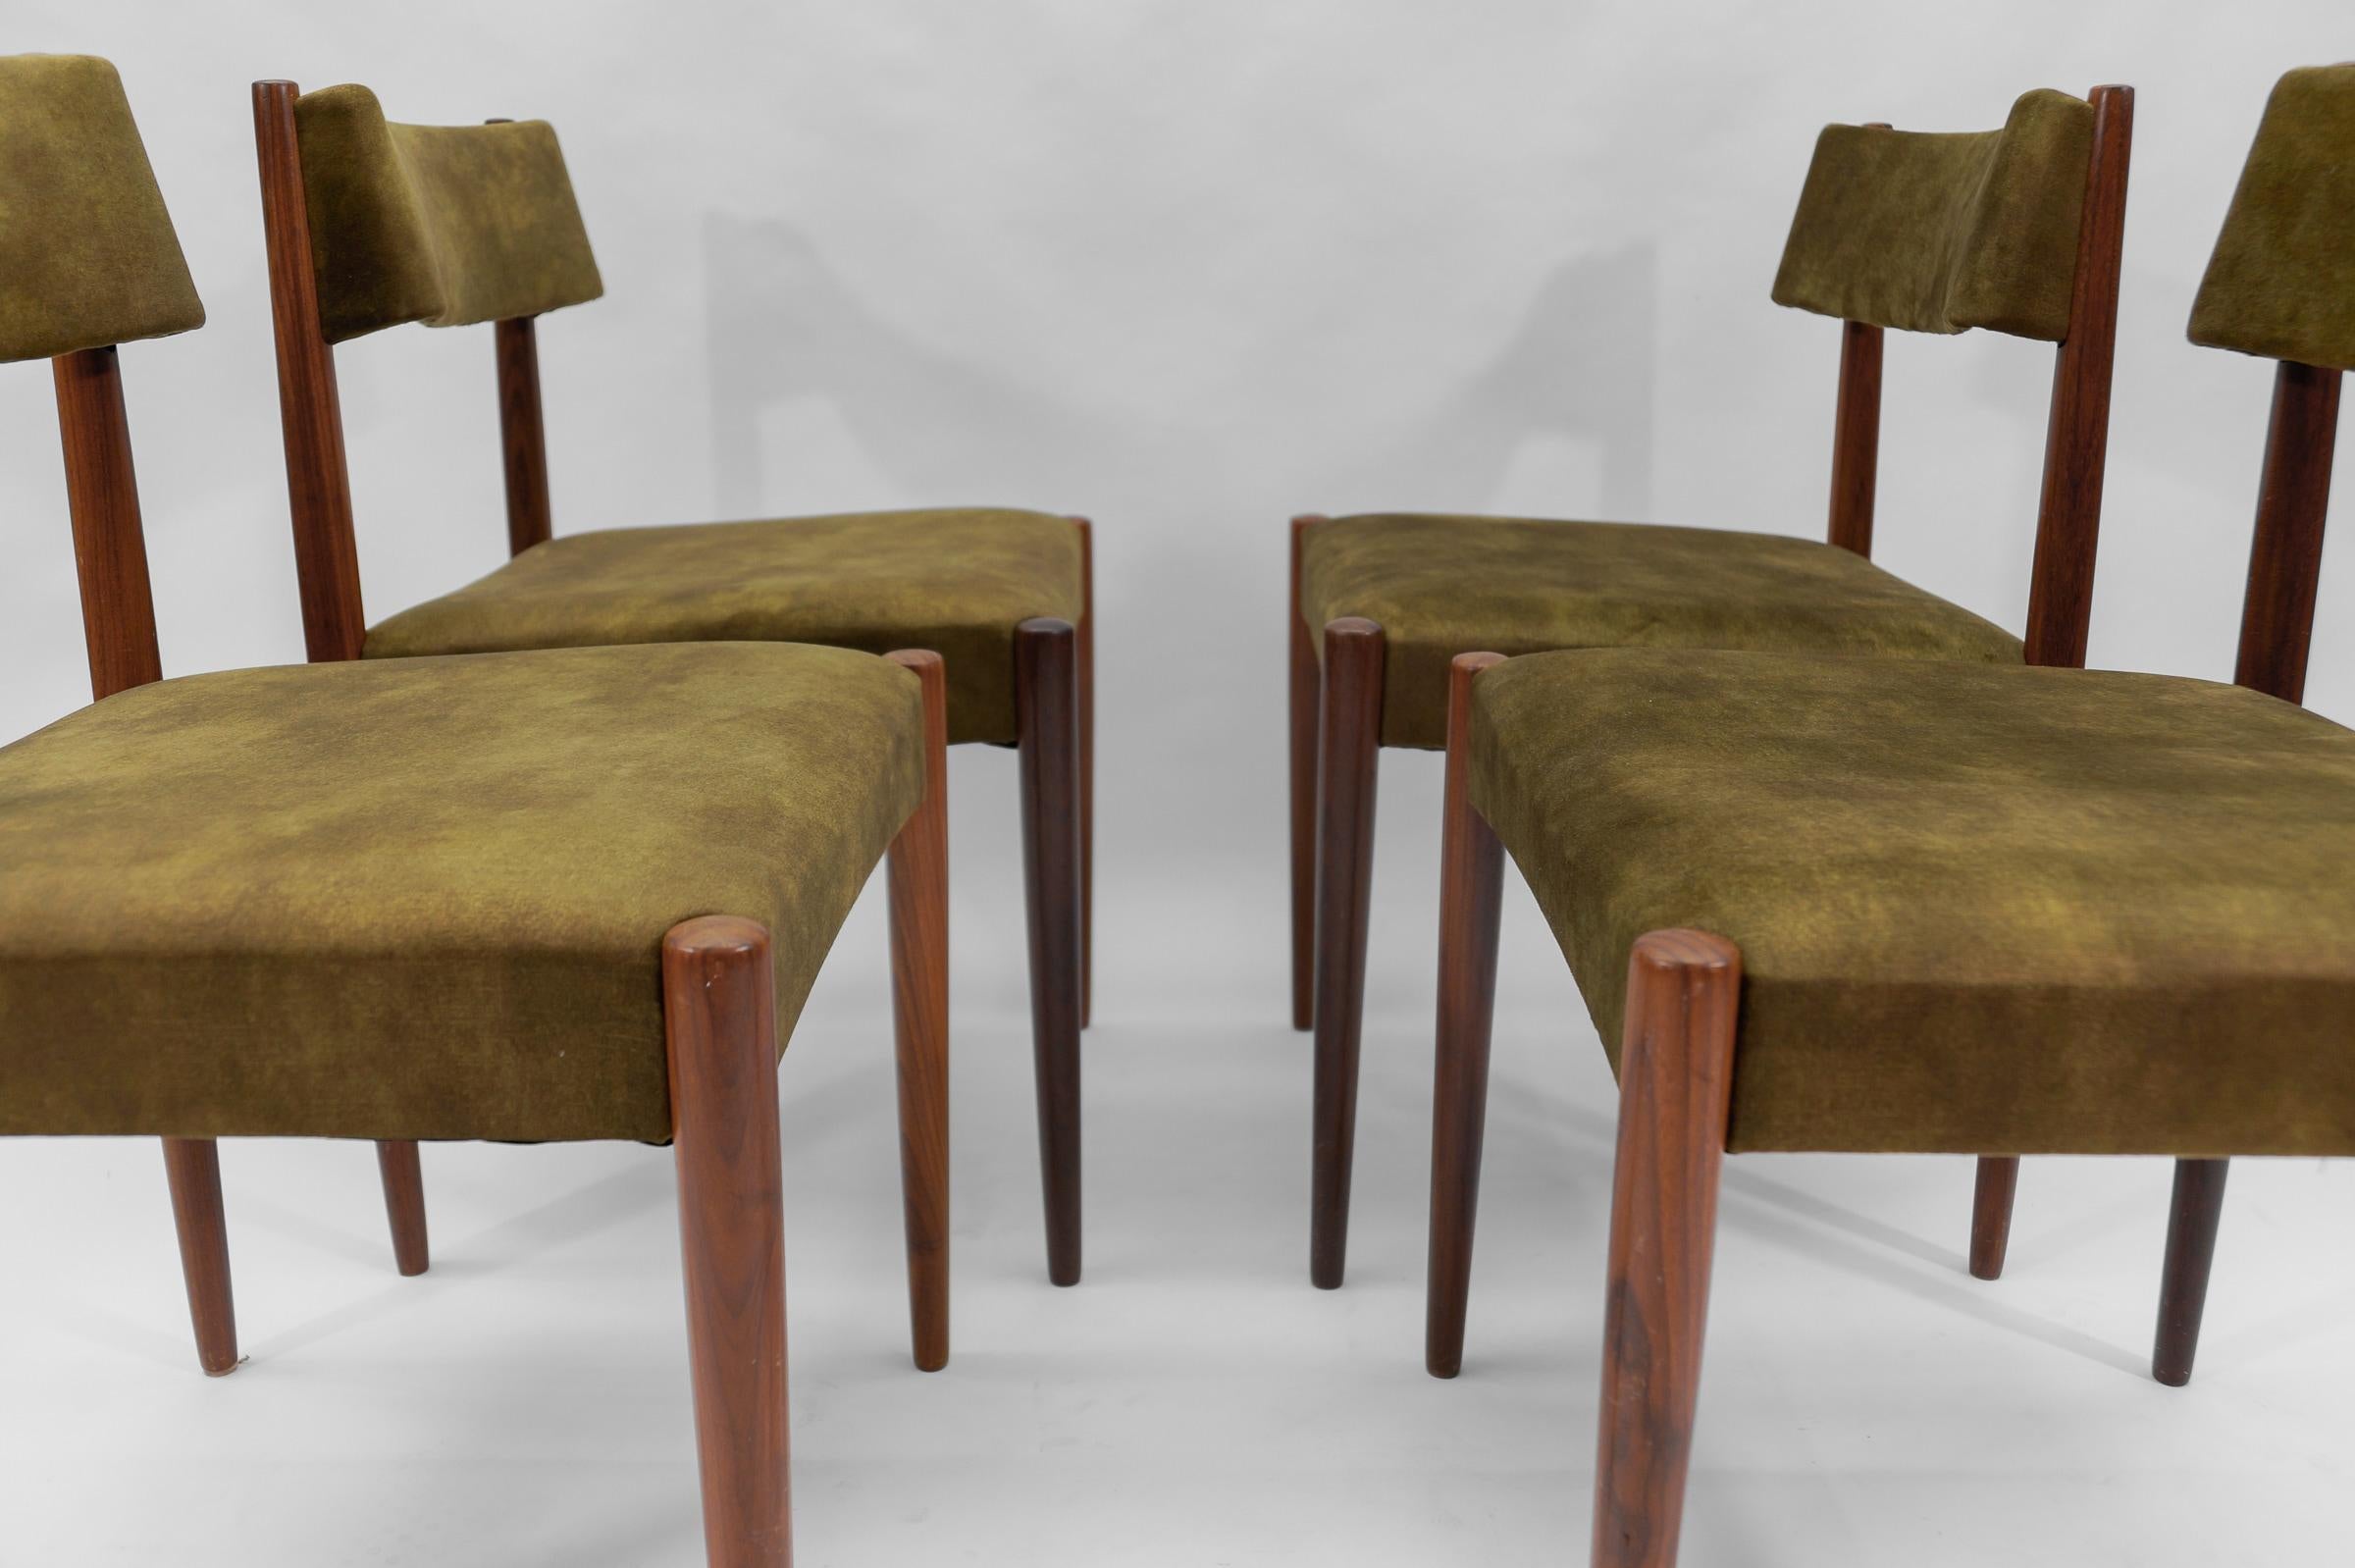 Fabric Four Wooden Scandinavian Dining Room Chairs, 1960s For Sale